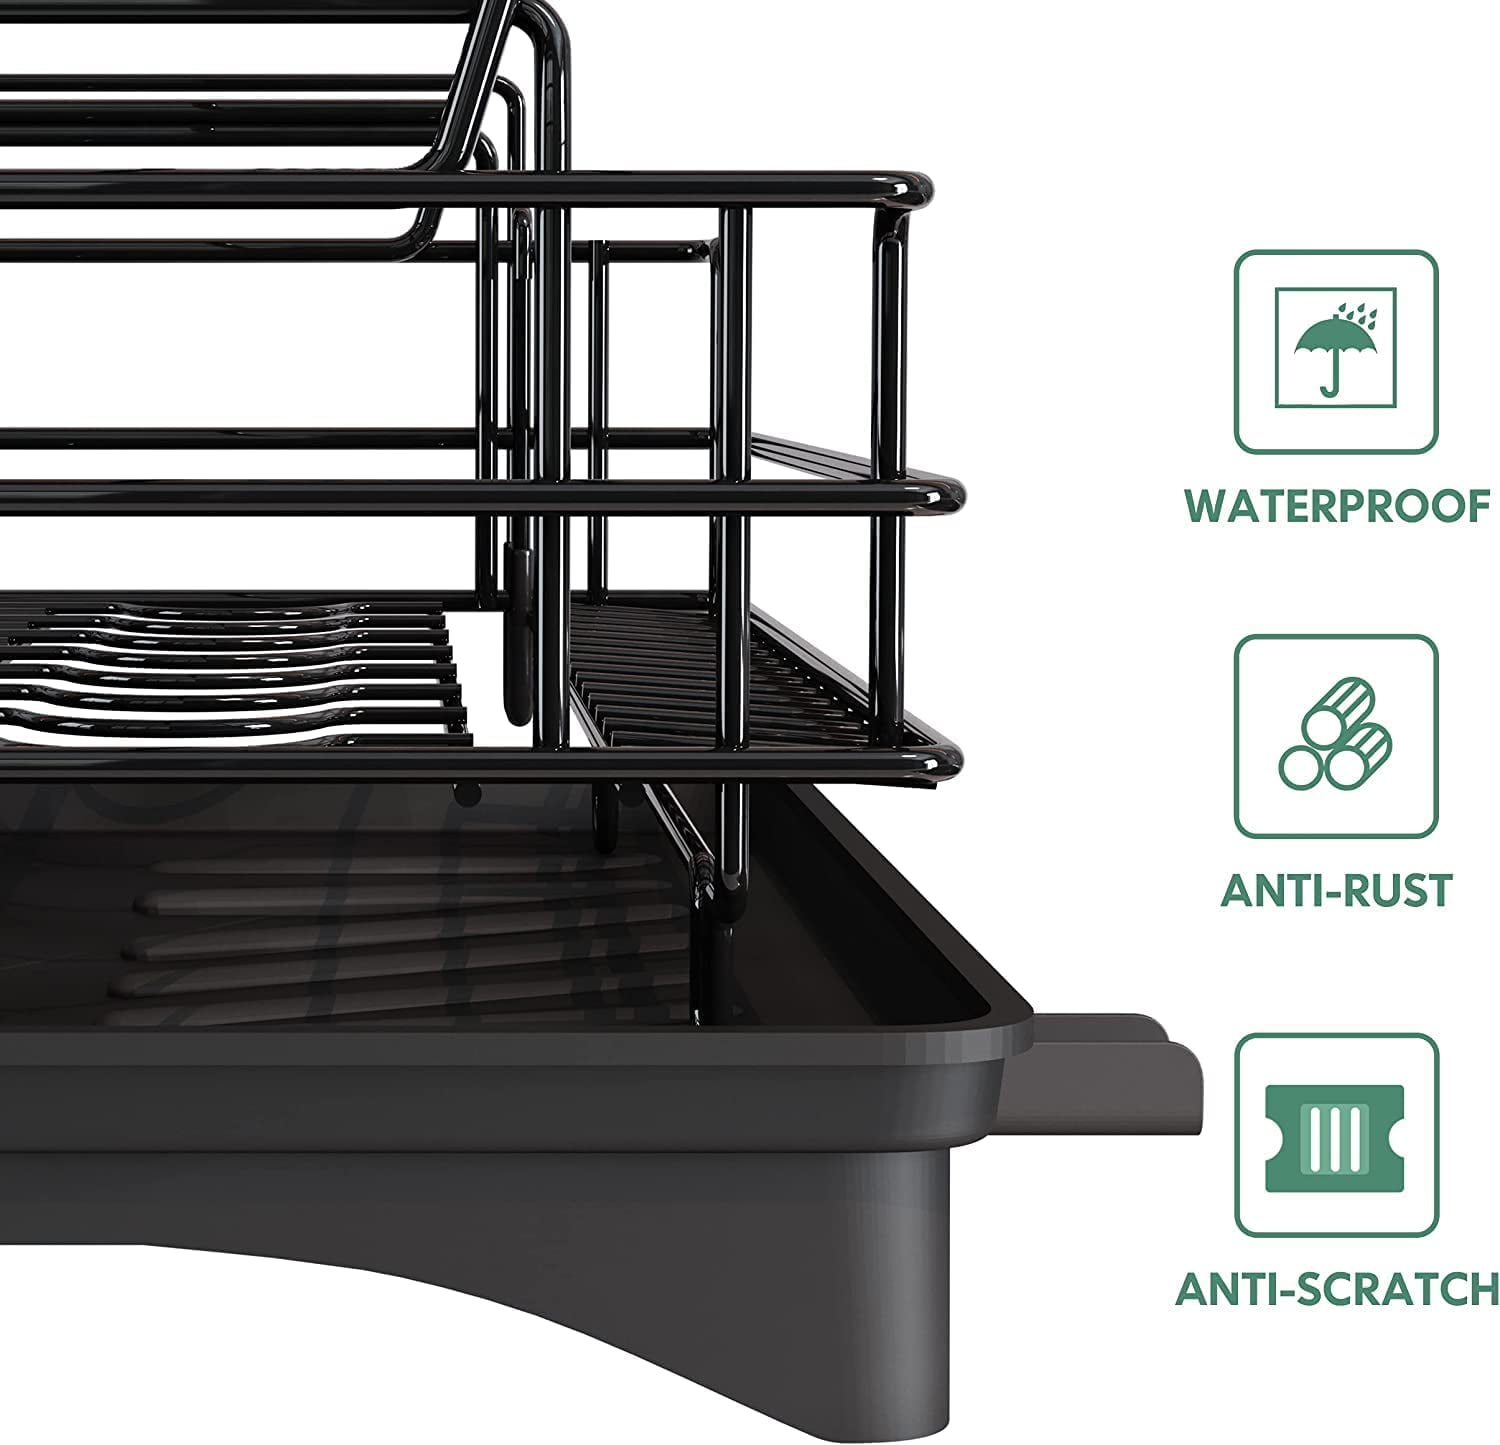 Lamstom 2-Tier Dish Drying Rack for Kitchen Counter,Detachable Large Capacity Dish Drainer Organizer with Utensil Holder, Drain Board,Black